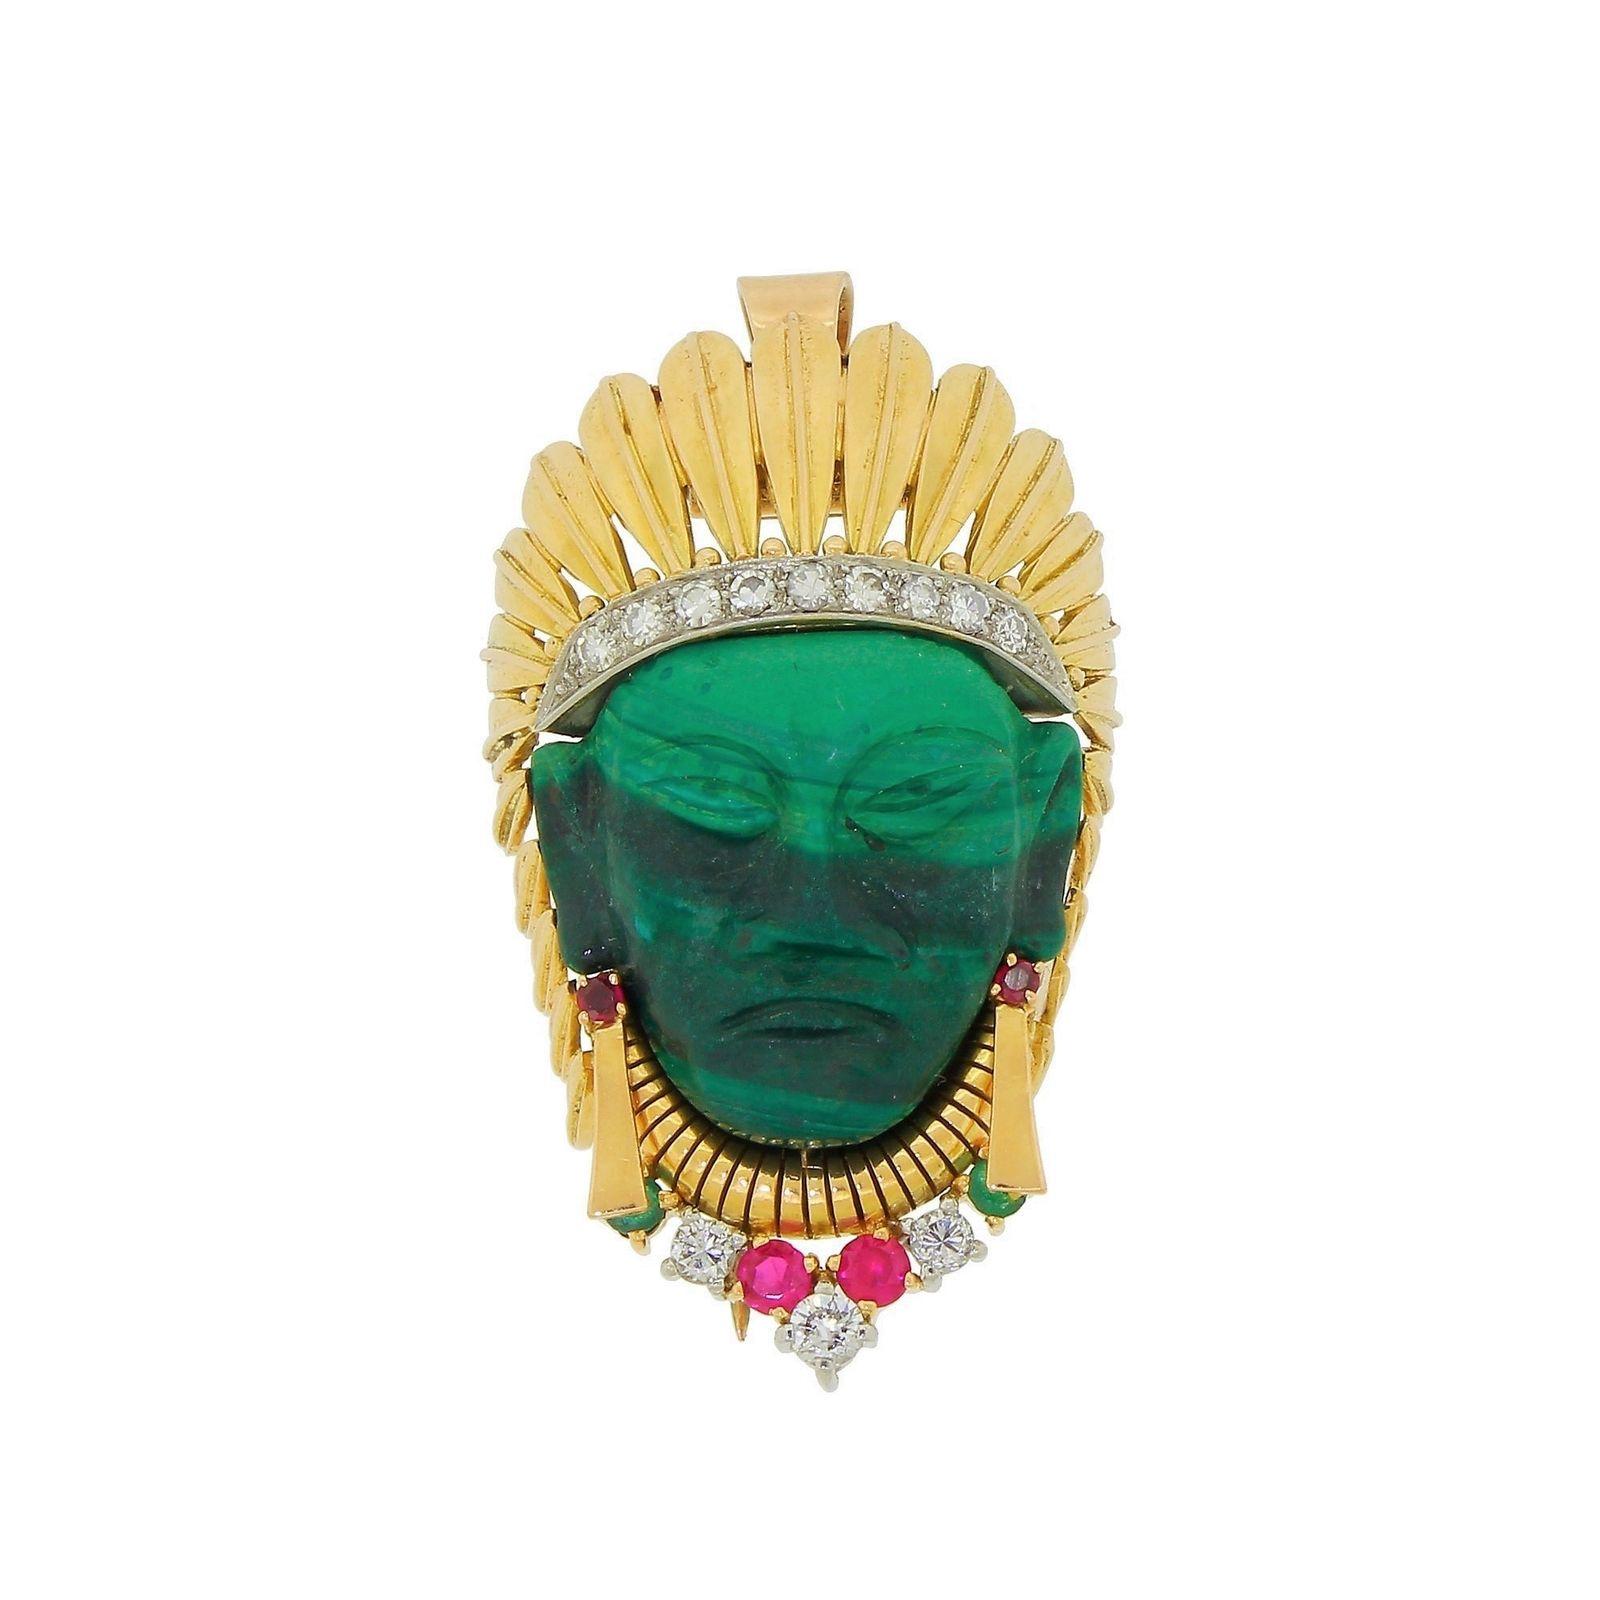  Sometimes you come across pieces of jewelry that are pure works of art, this outstanding Indian head clip / pendant combination is one of them. 
It truly is stunning in person. The beauty of this set is that it can be worn in a multitude of ways as